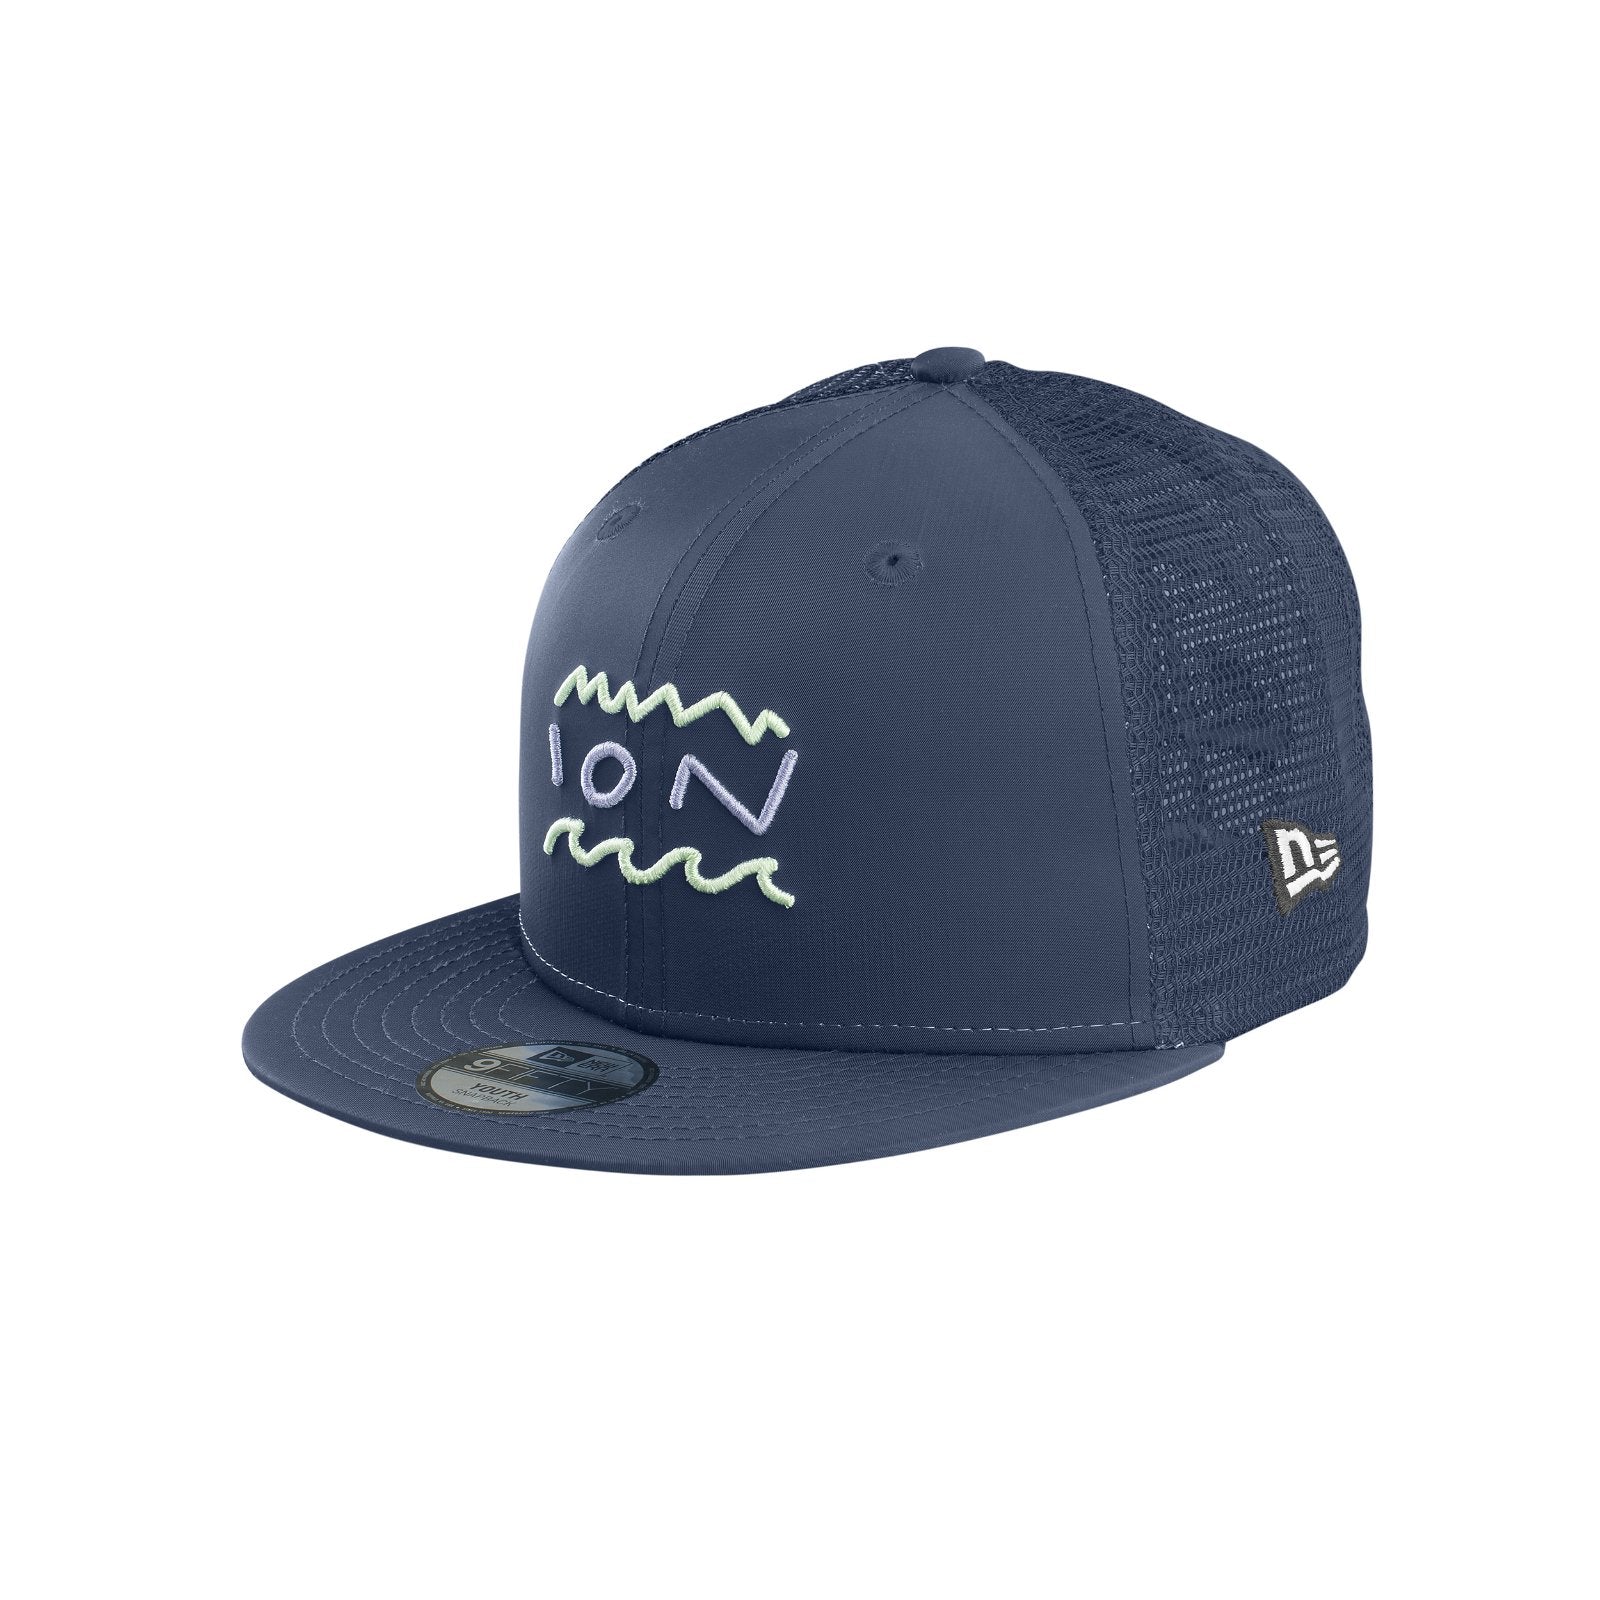 ION Cap Statement Youth 2024-ION Bike-OneSize-blue-46230-5857-9010583119779-Surf-store.com